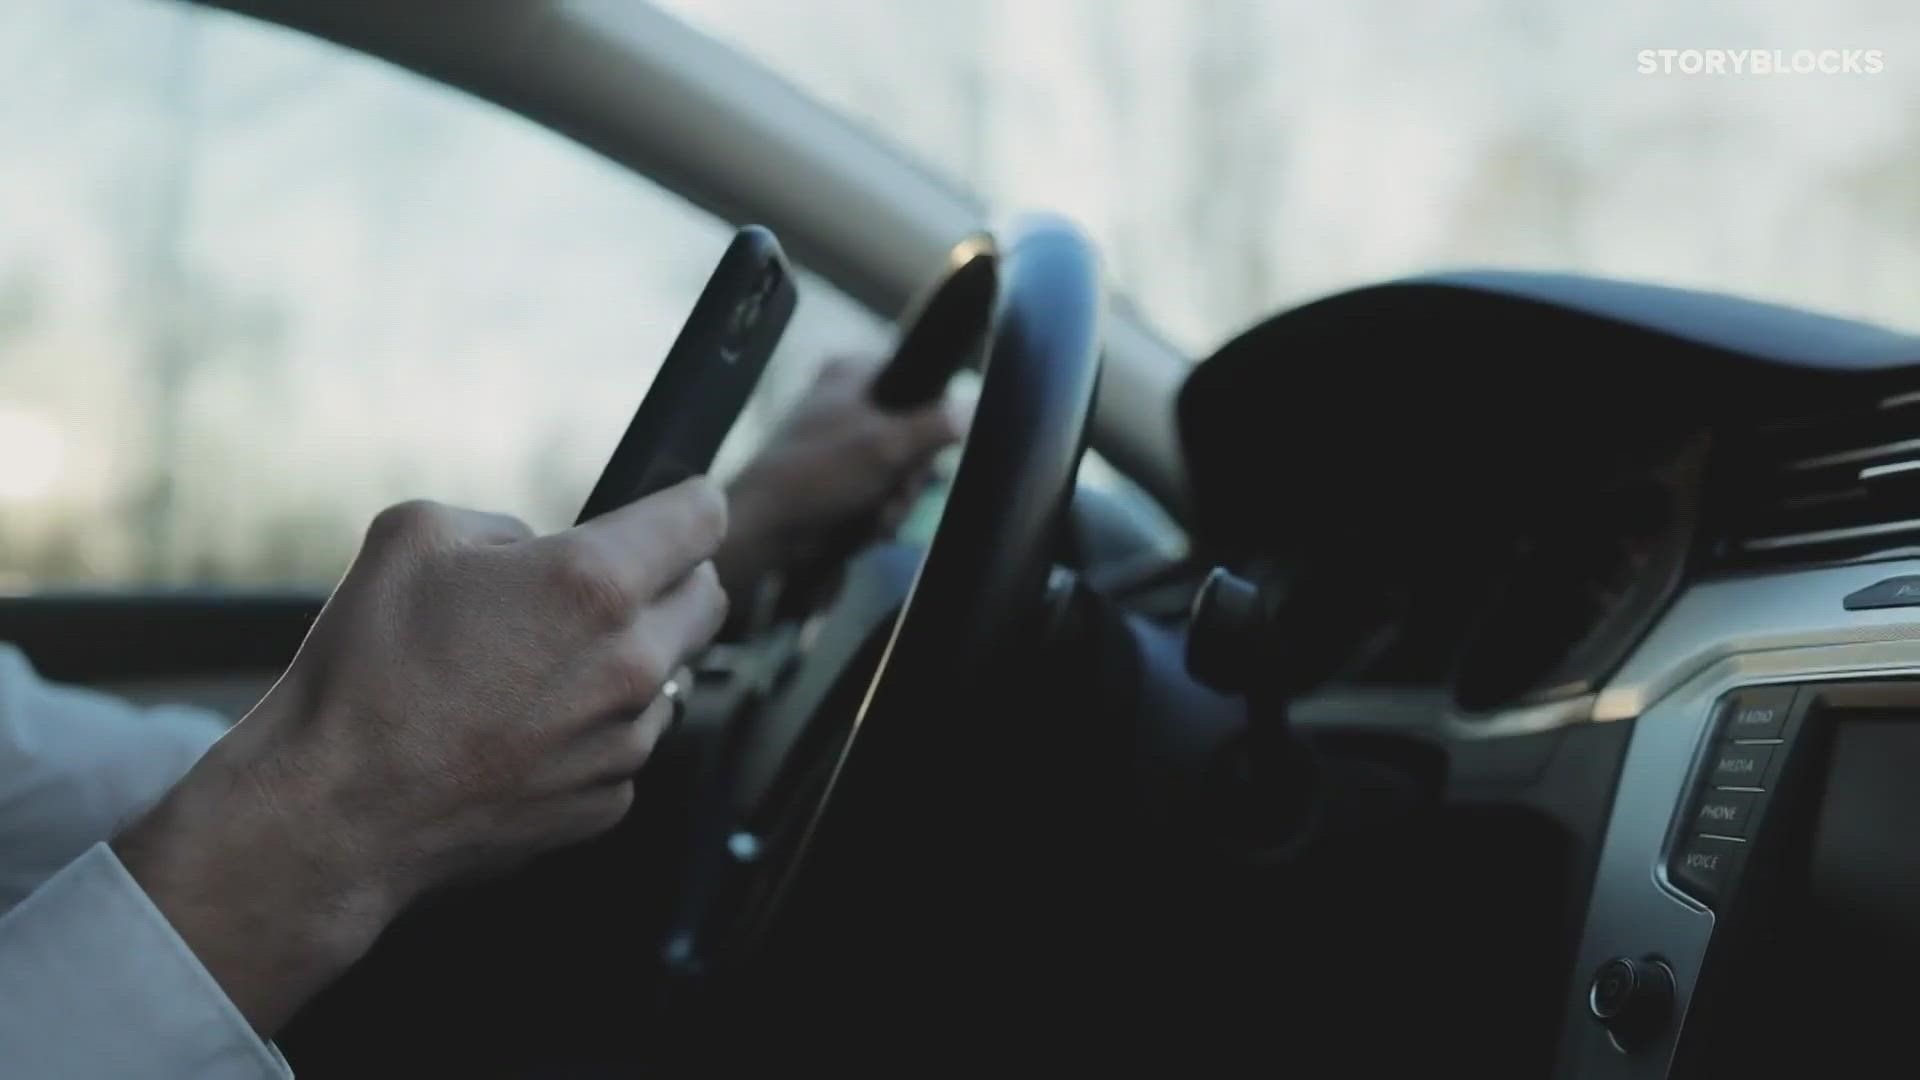 Missouri is one of only two states where texting while driving is not banned for all drivers.